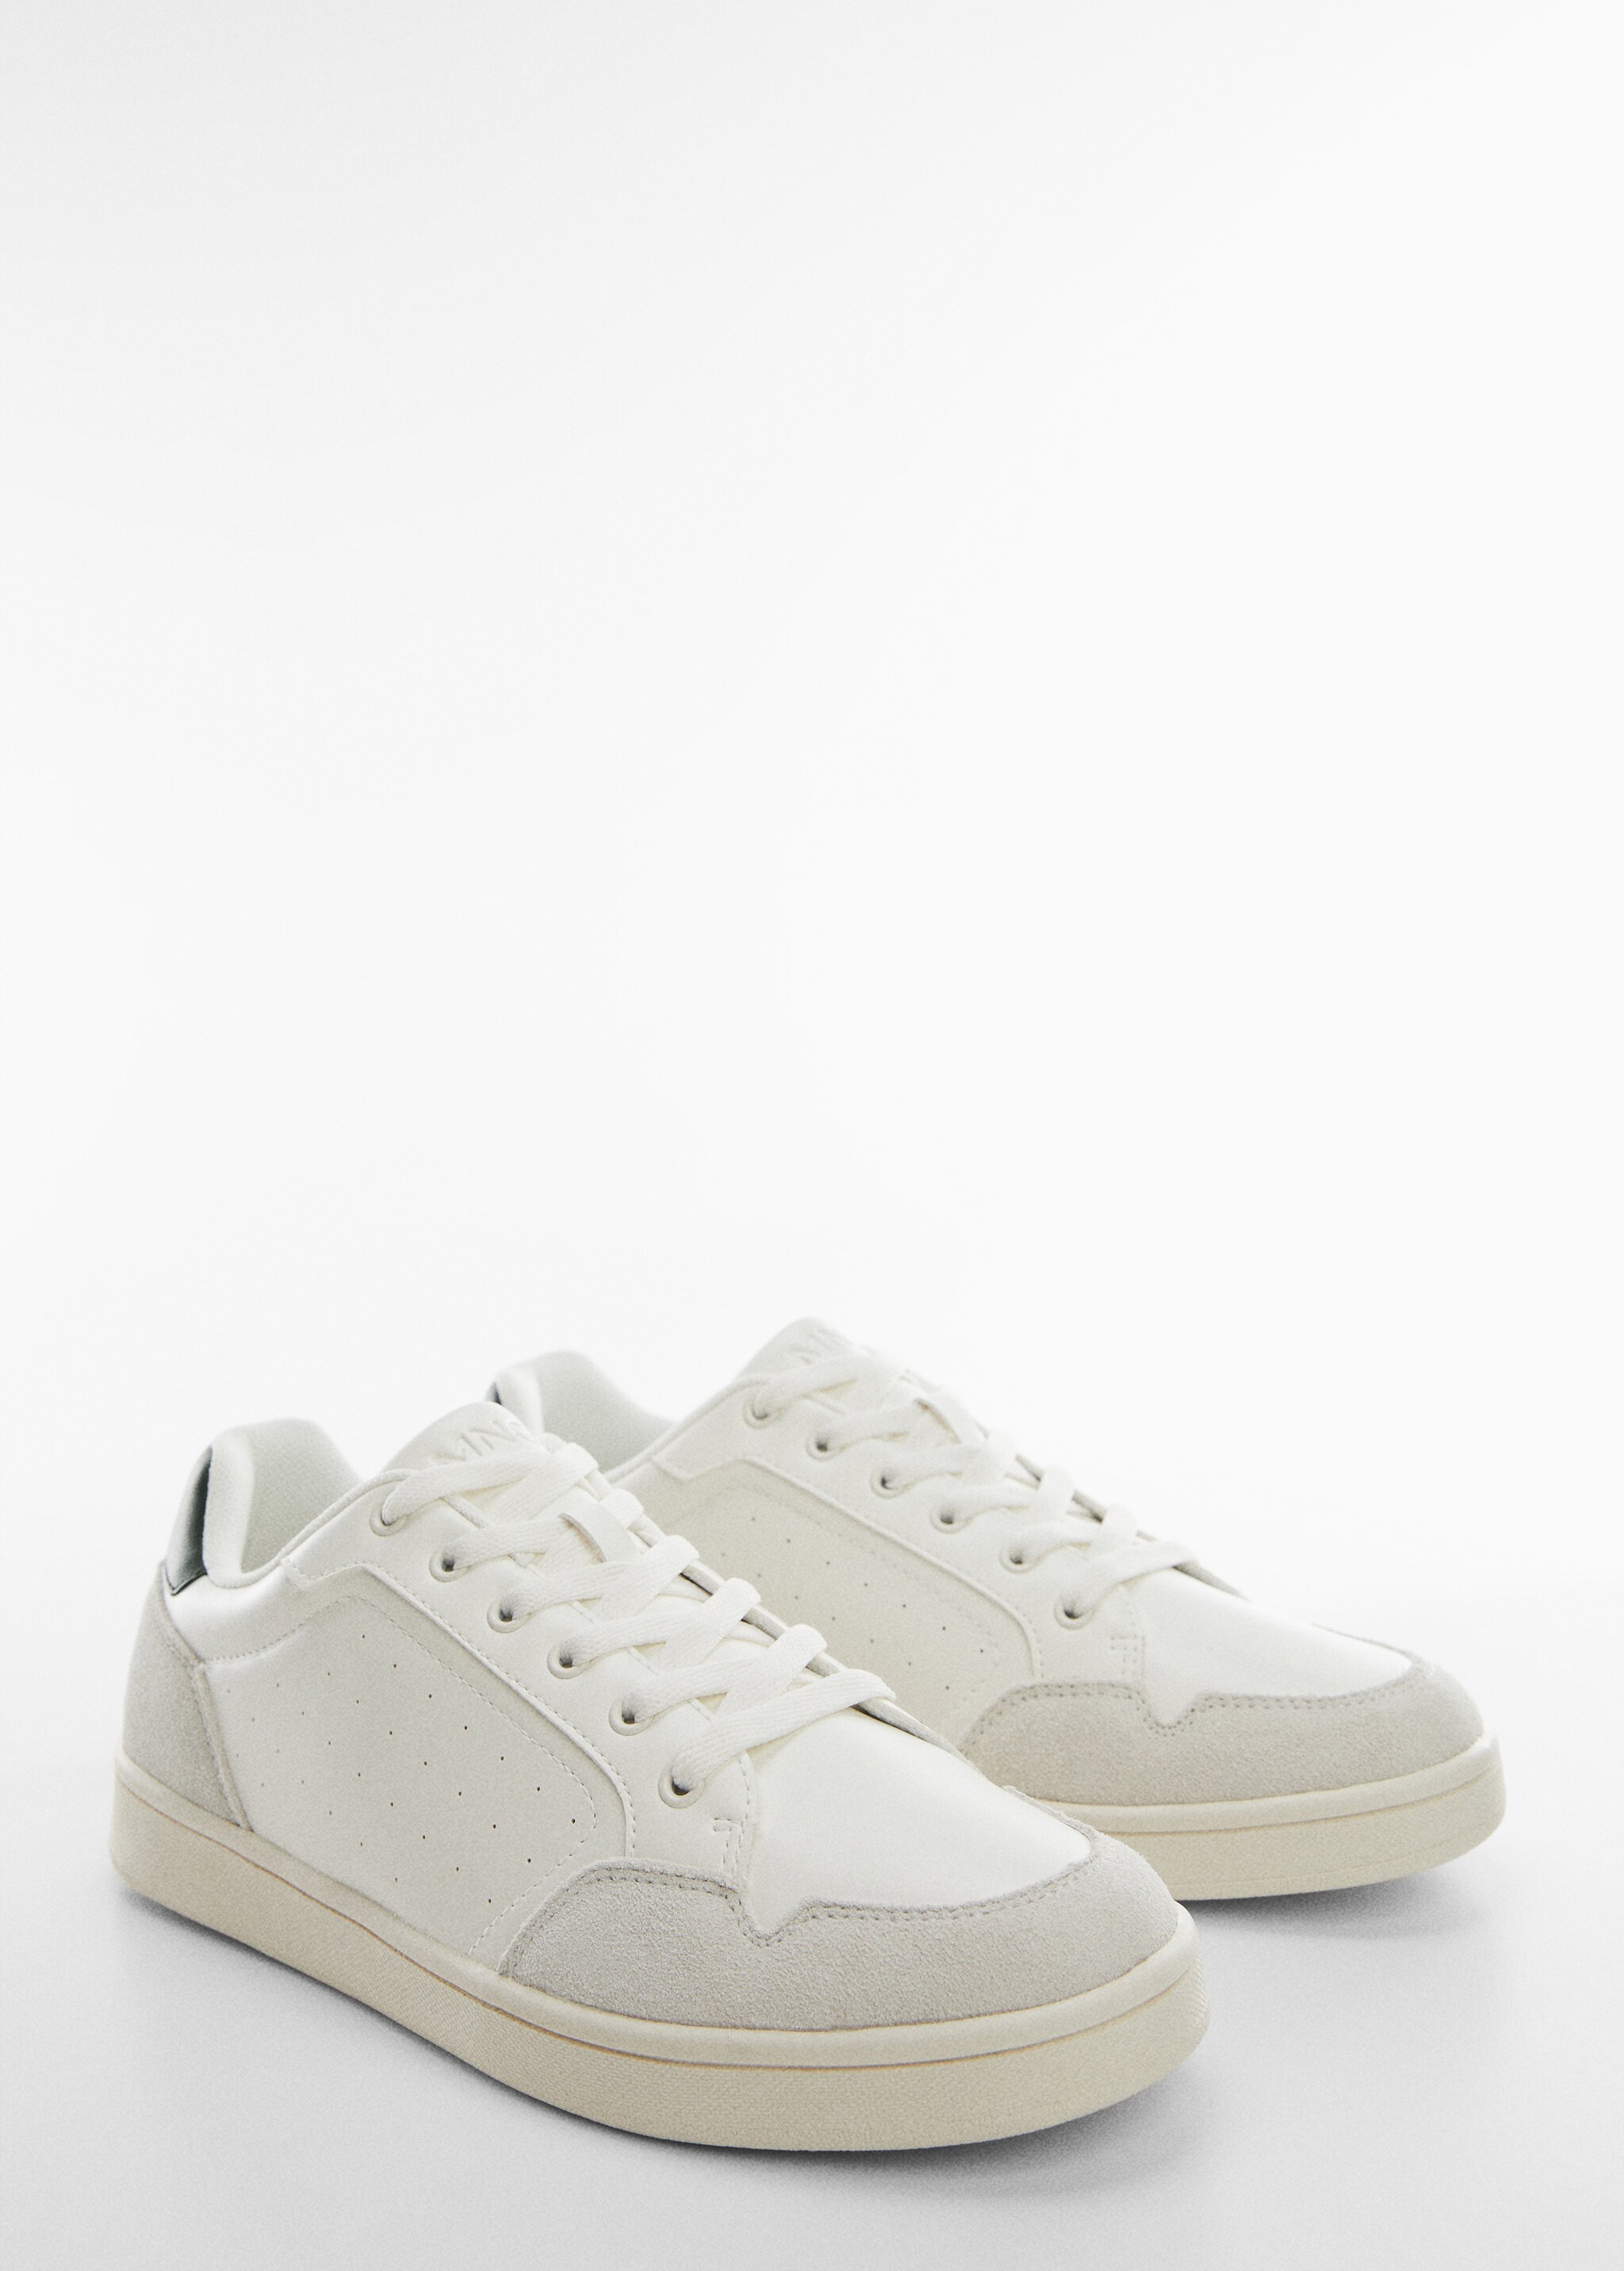 Lace-up leather sneakers - Medium plane